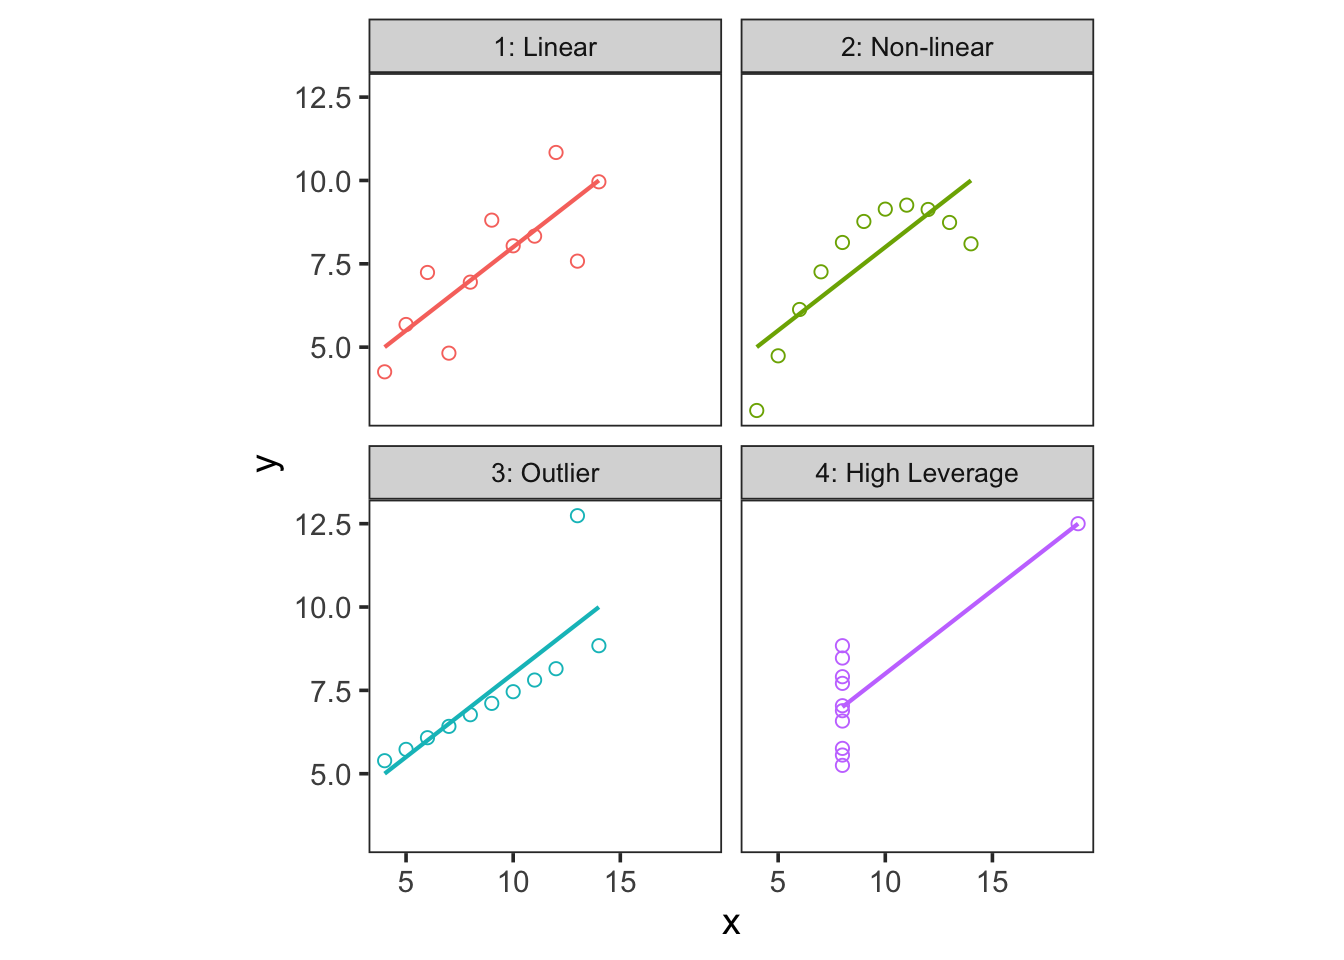 Anscombe's Quartet. All for data sets have the same x-mean & variance, y-mean & variance, and the same slope, intercept, and correlation coefficient from an OLS linear model.